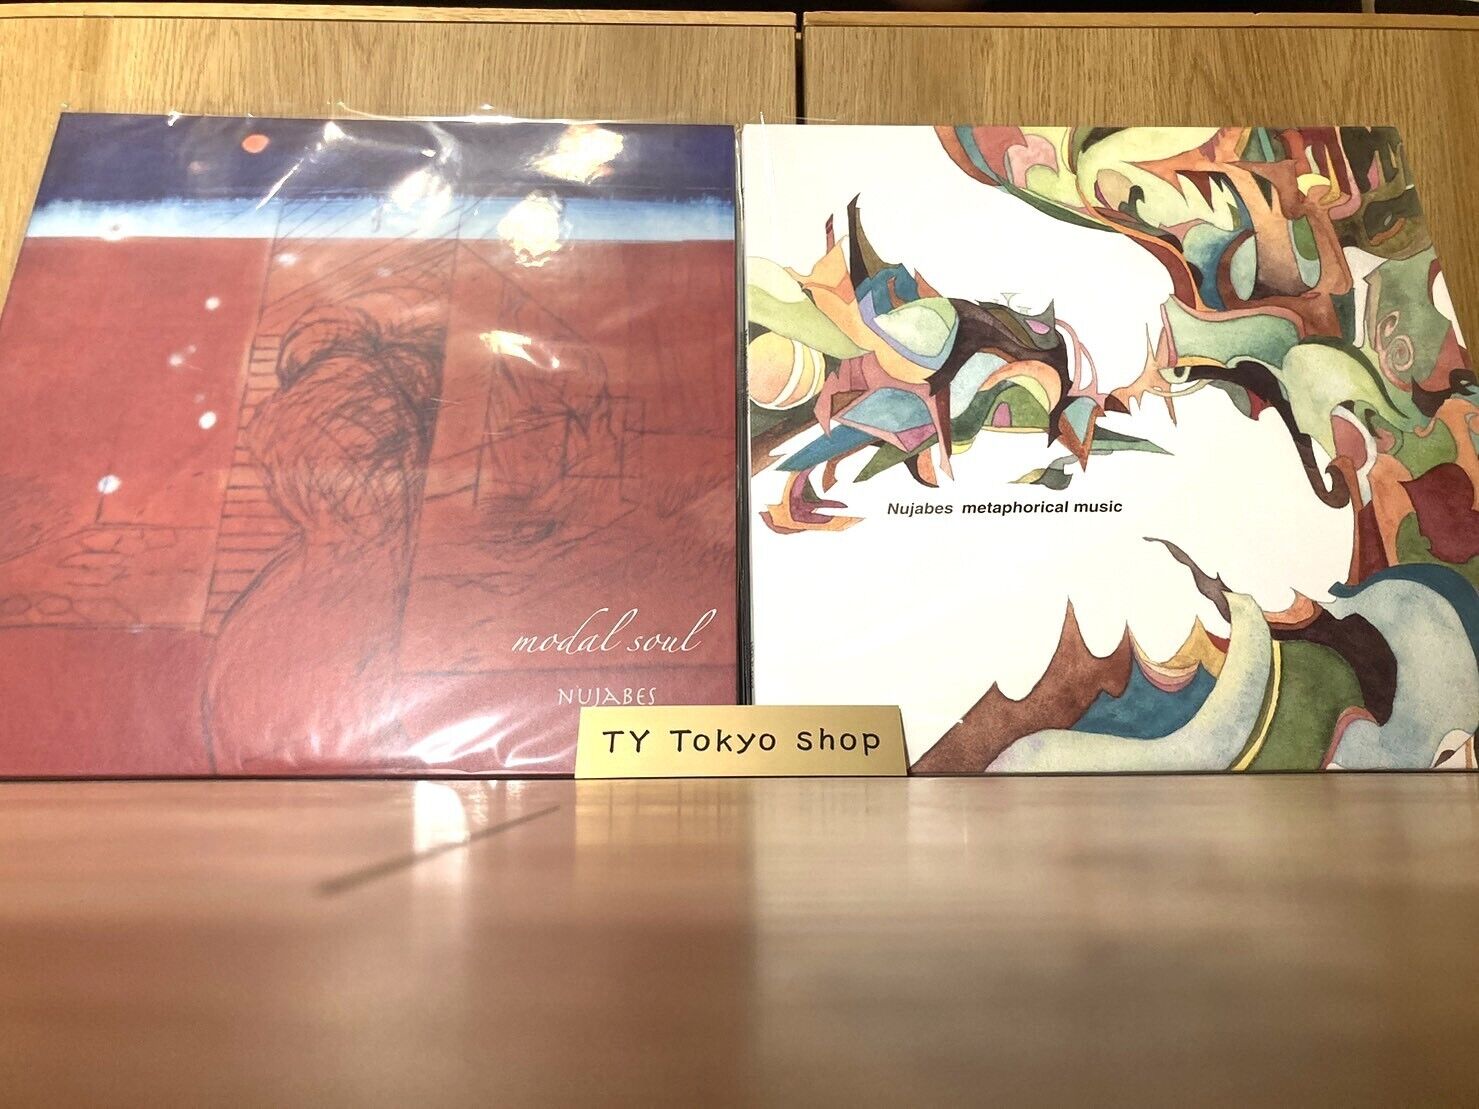 NUJABES Metaphorical Music and Modal Soul 2LP Set Vinyl Record NEW From Japan